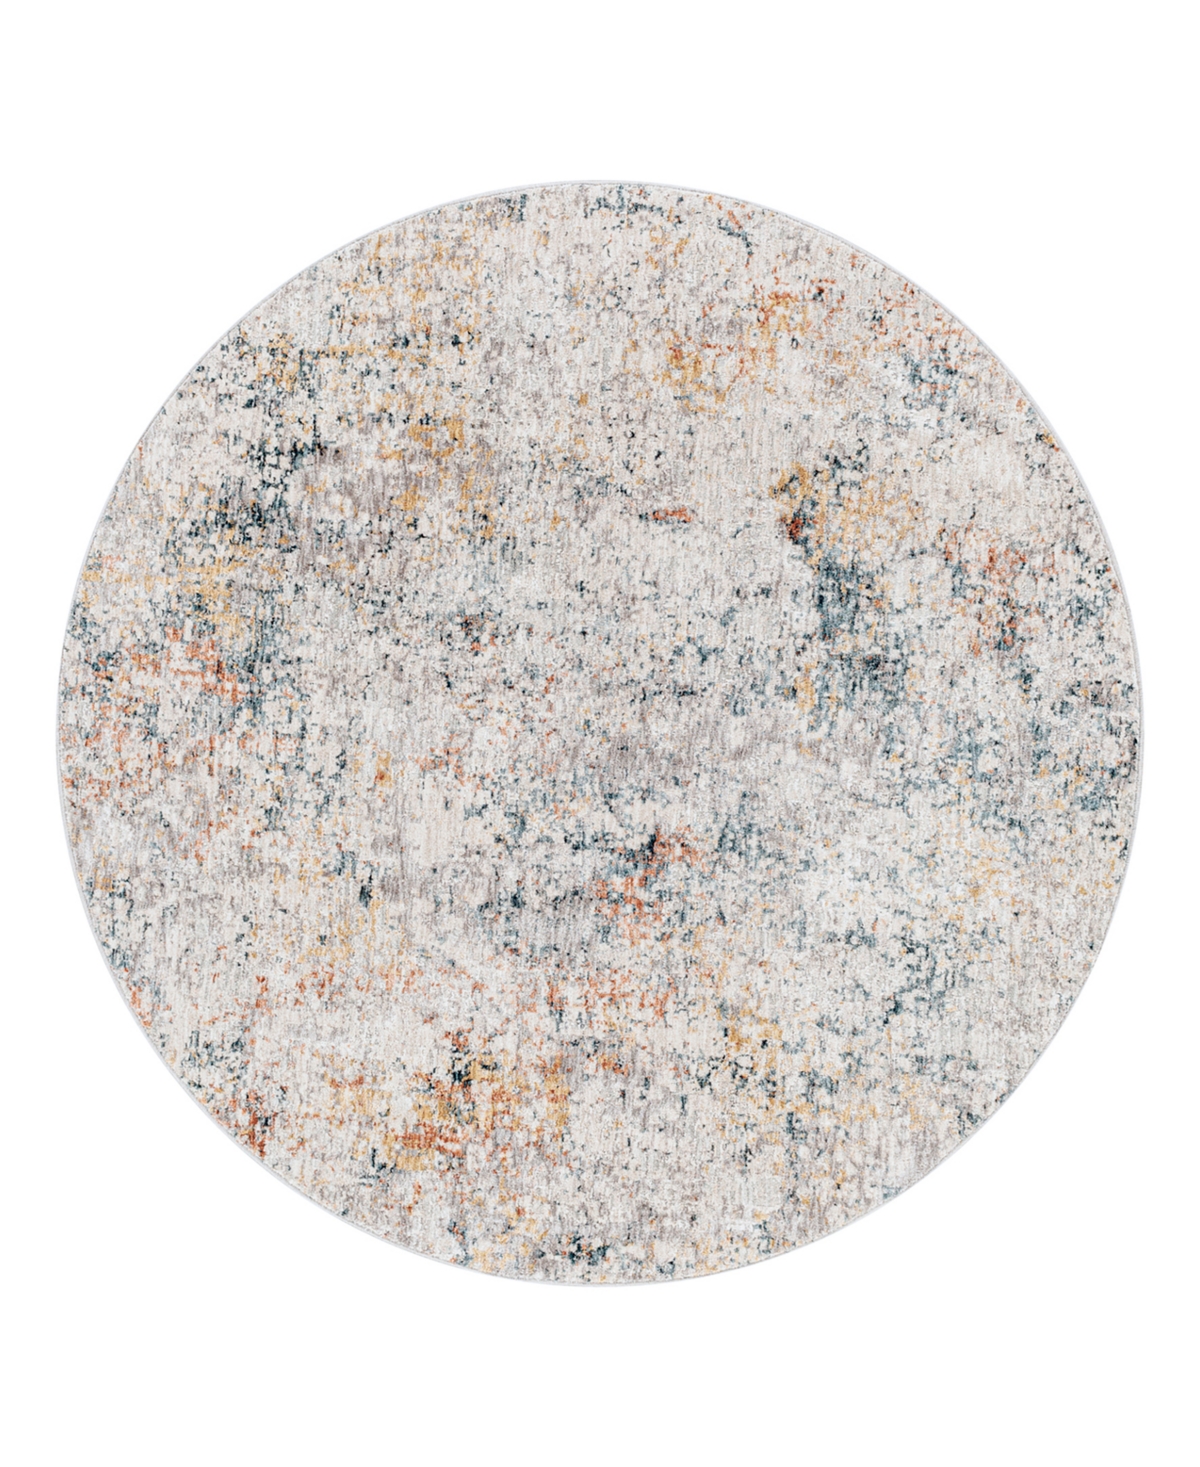 Shop Surya Laila Laa-2304 7'10x7'10 Round Area Rug In Silver